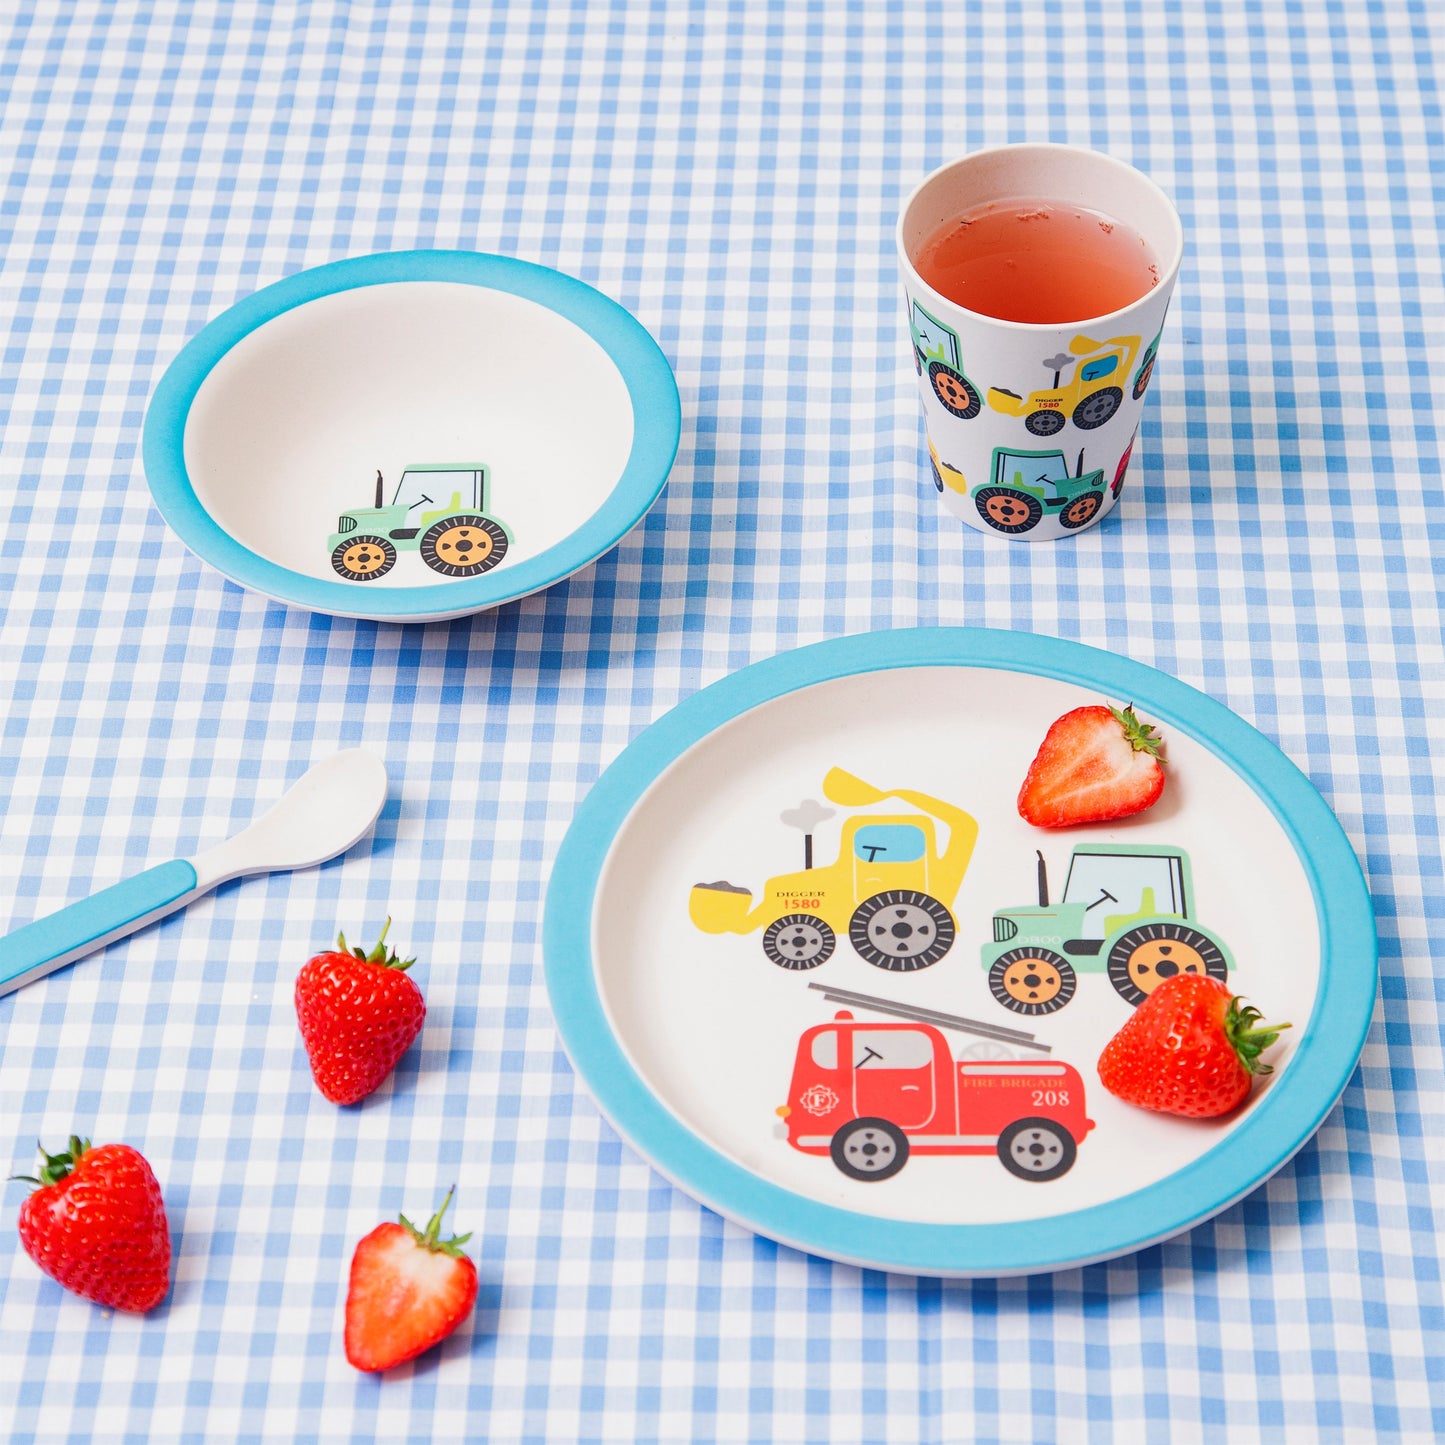 Fun and educational bamboo tableware and cutlery set in a primary colour based transport themed design featuring a tractor, digger and fire engine.